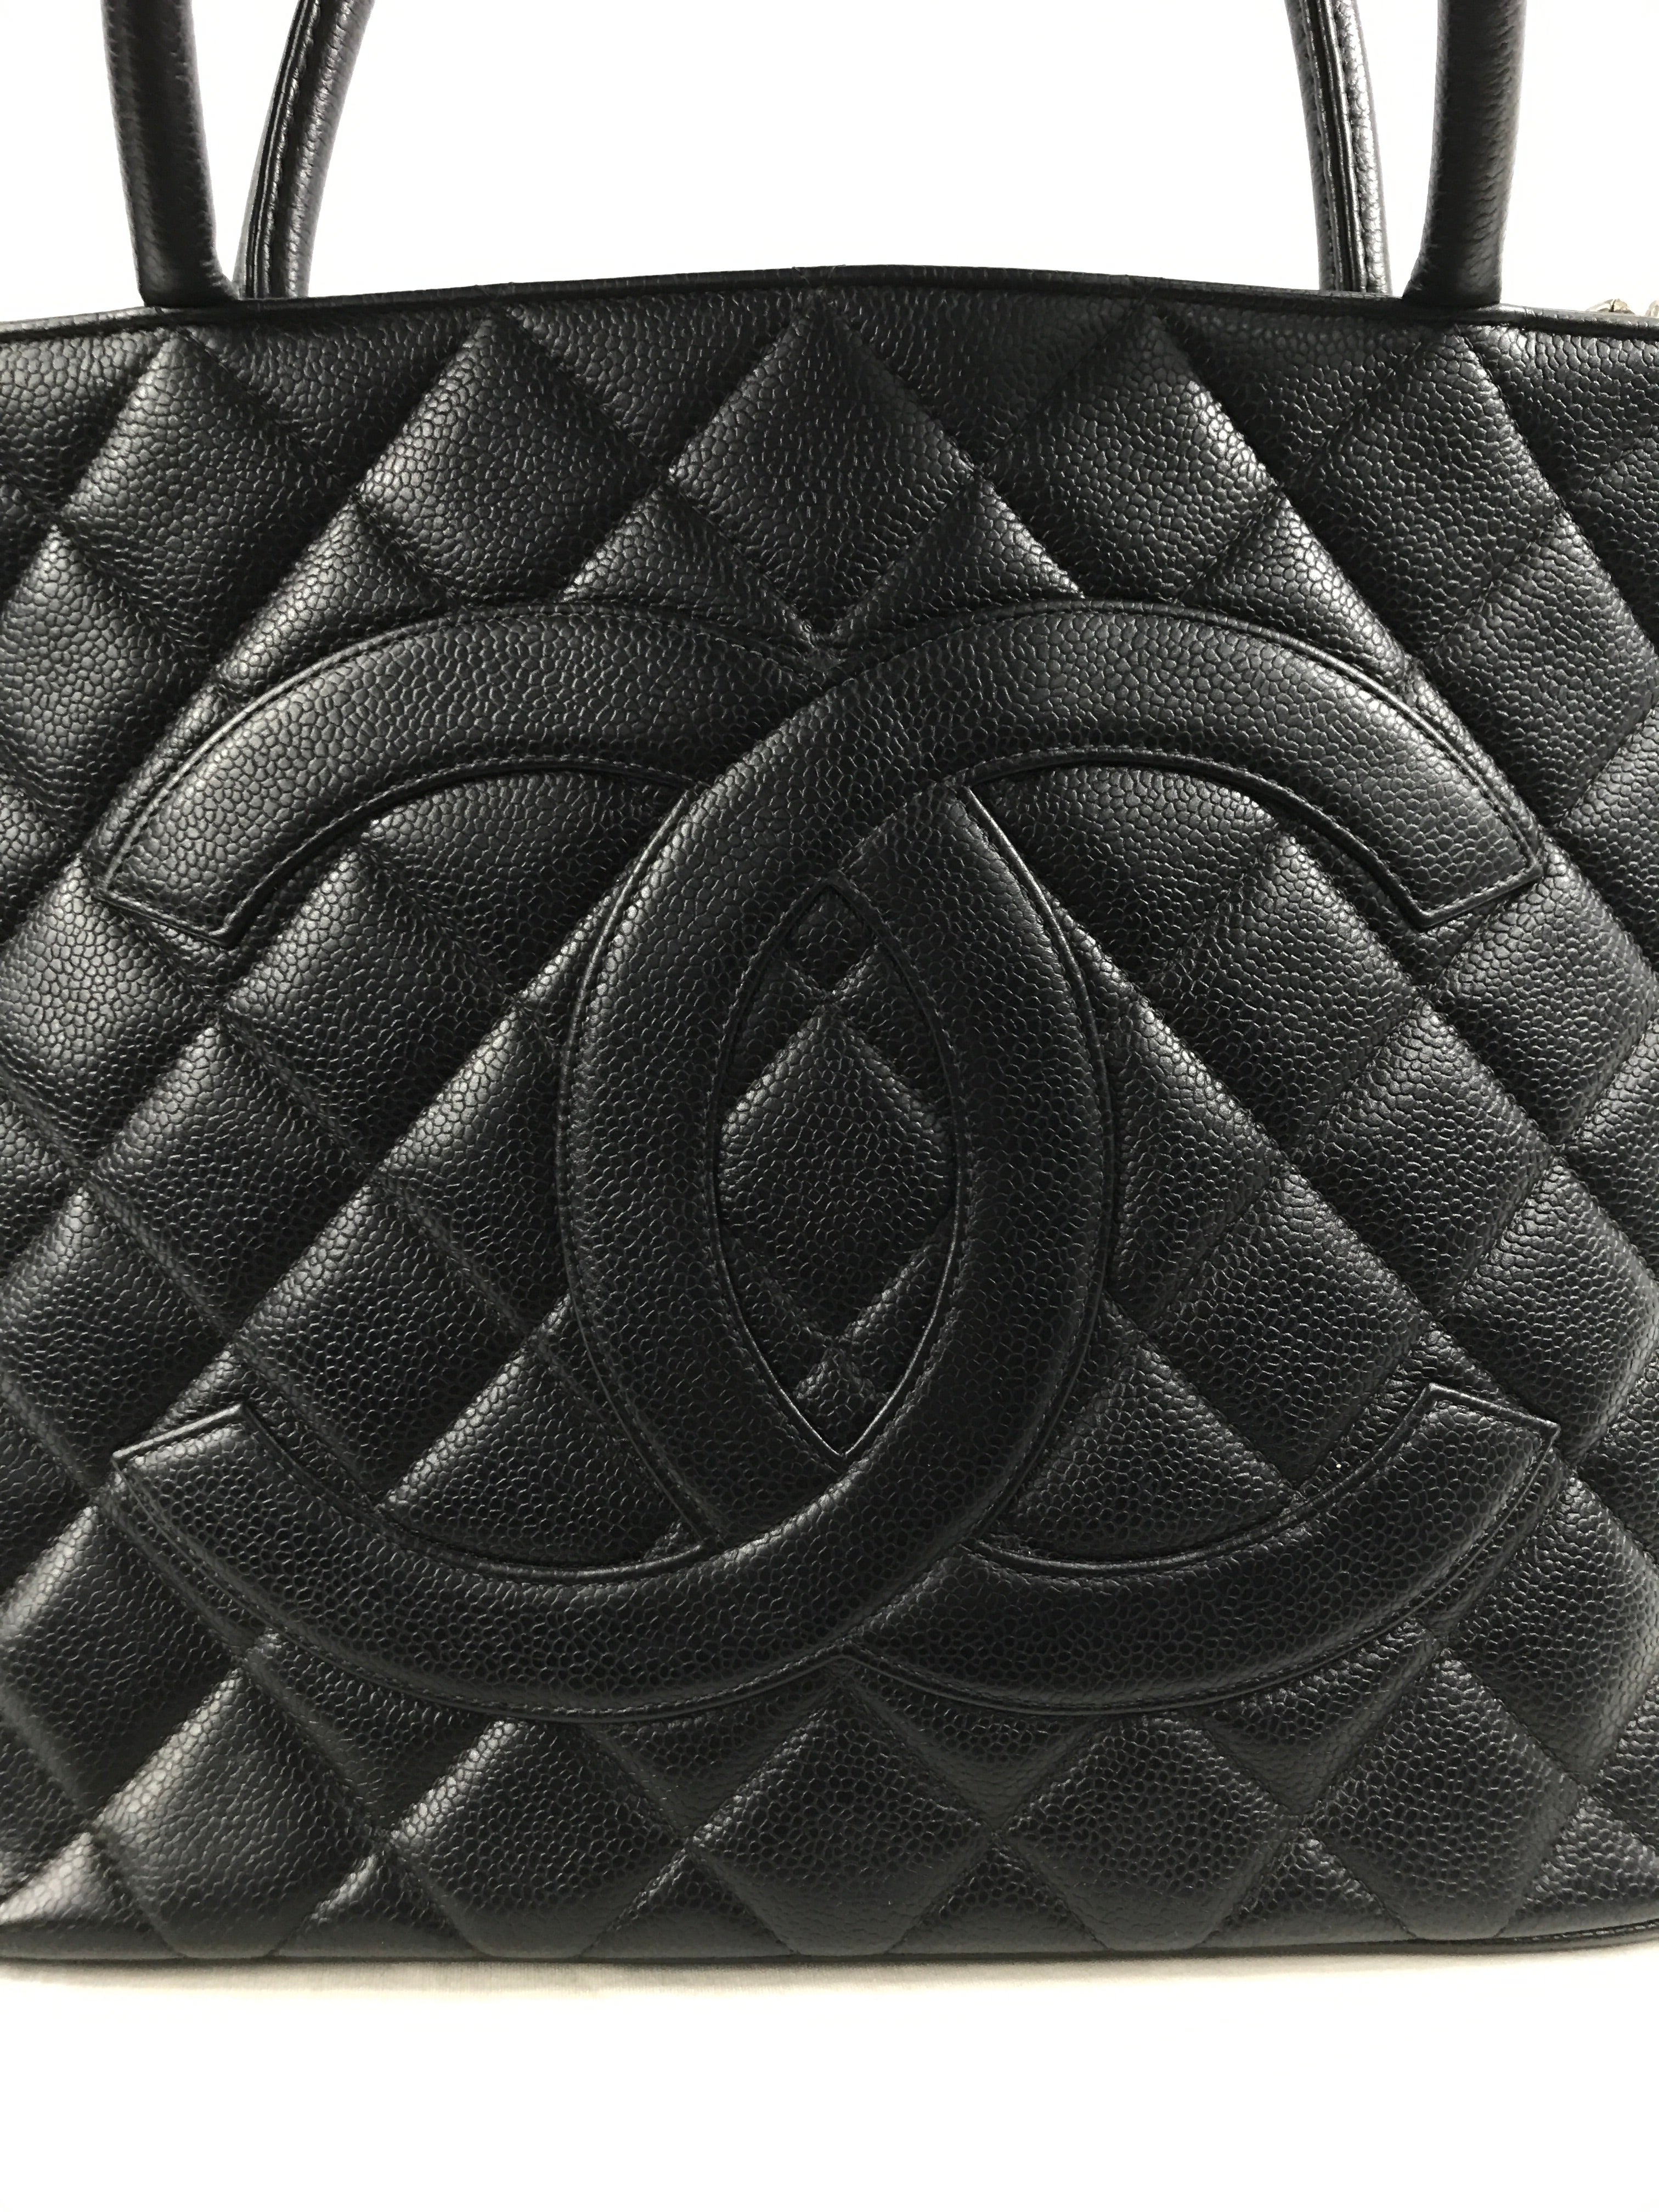 Black Caviar Quilted Timeless CC Medallion Tote w/RHW-PENDING